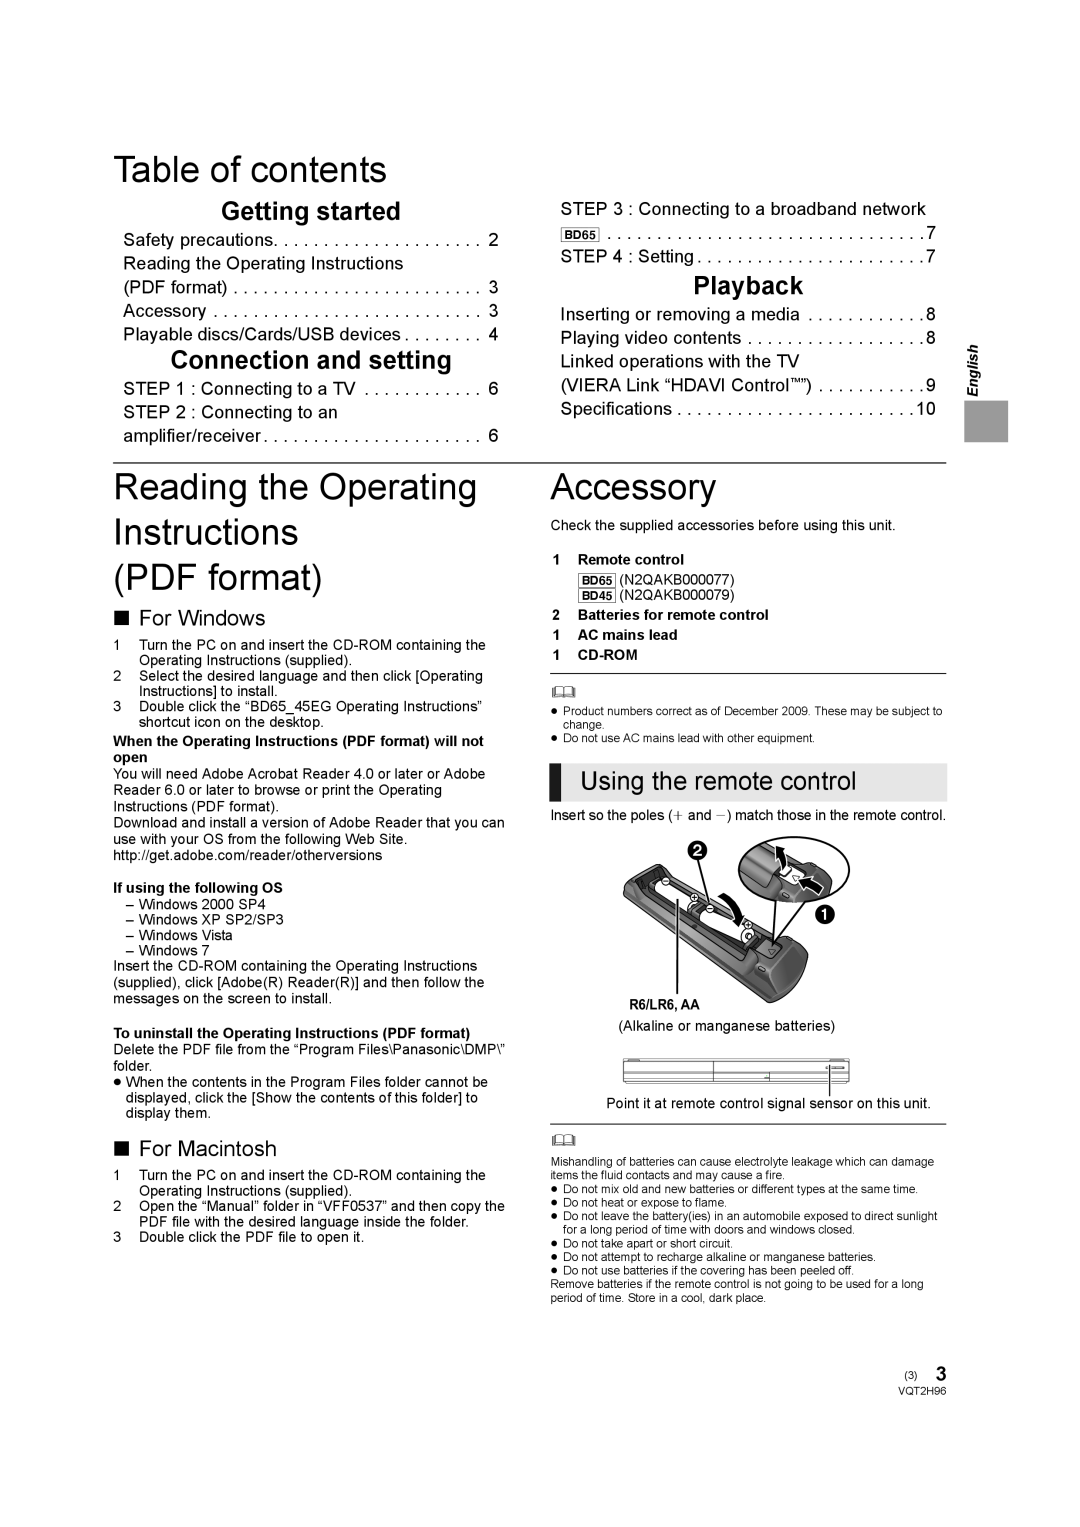 Panasonic DMP-BD65 Table of contents, Reading the Operating Instructions PDF format, Accessory, Using the remote control 